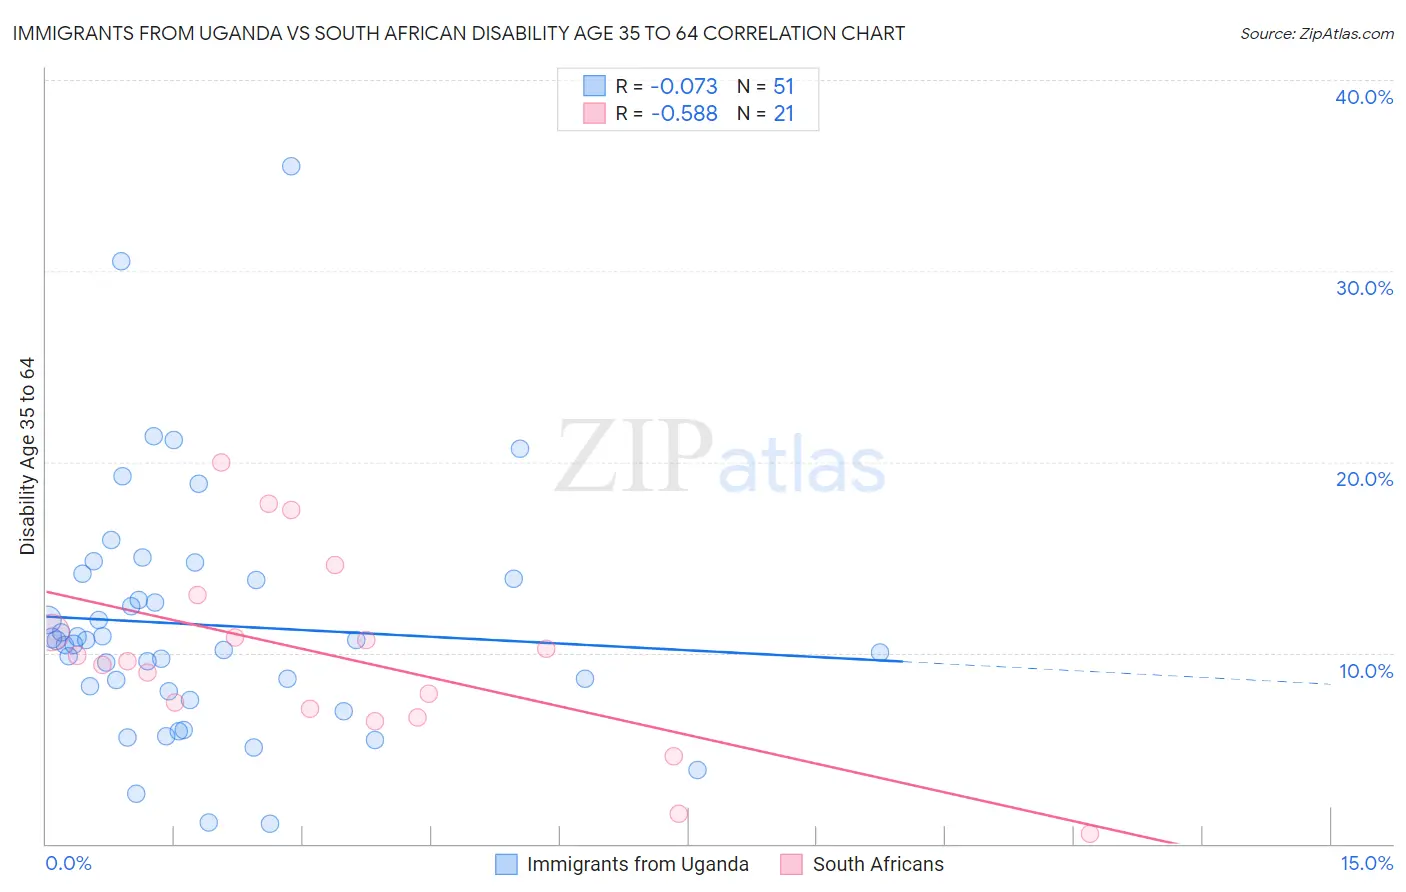 Immigrants from Uganda vs South African Disability Age 35 to 64